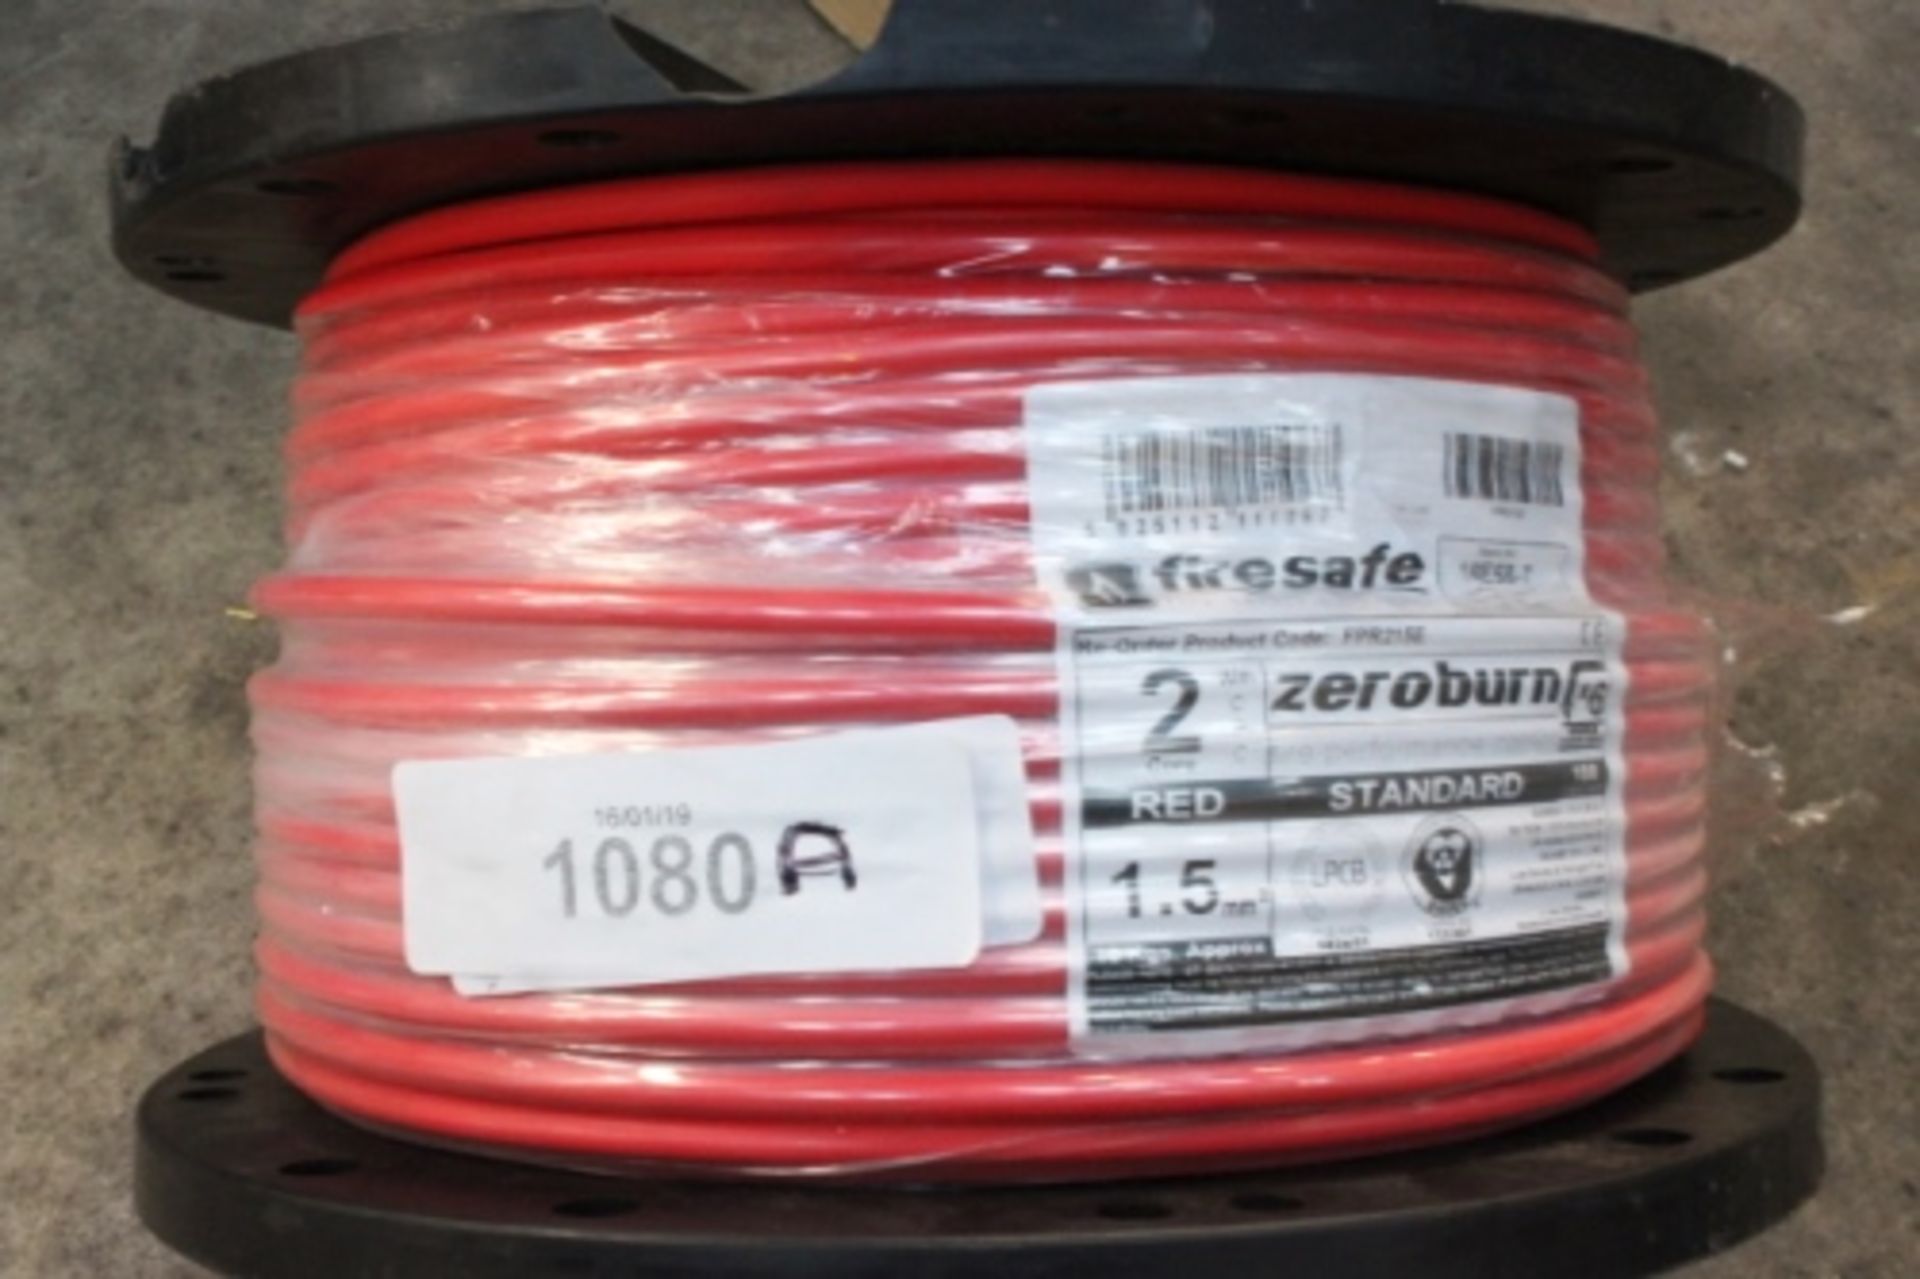 A roll of fire safe zero burn red cable - New (GS2)